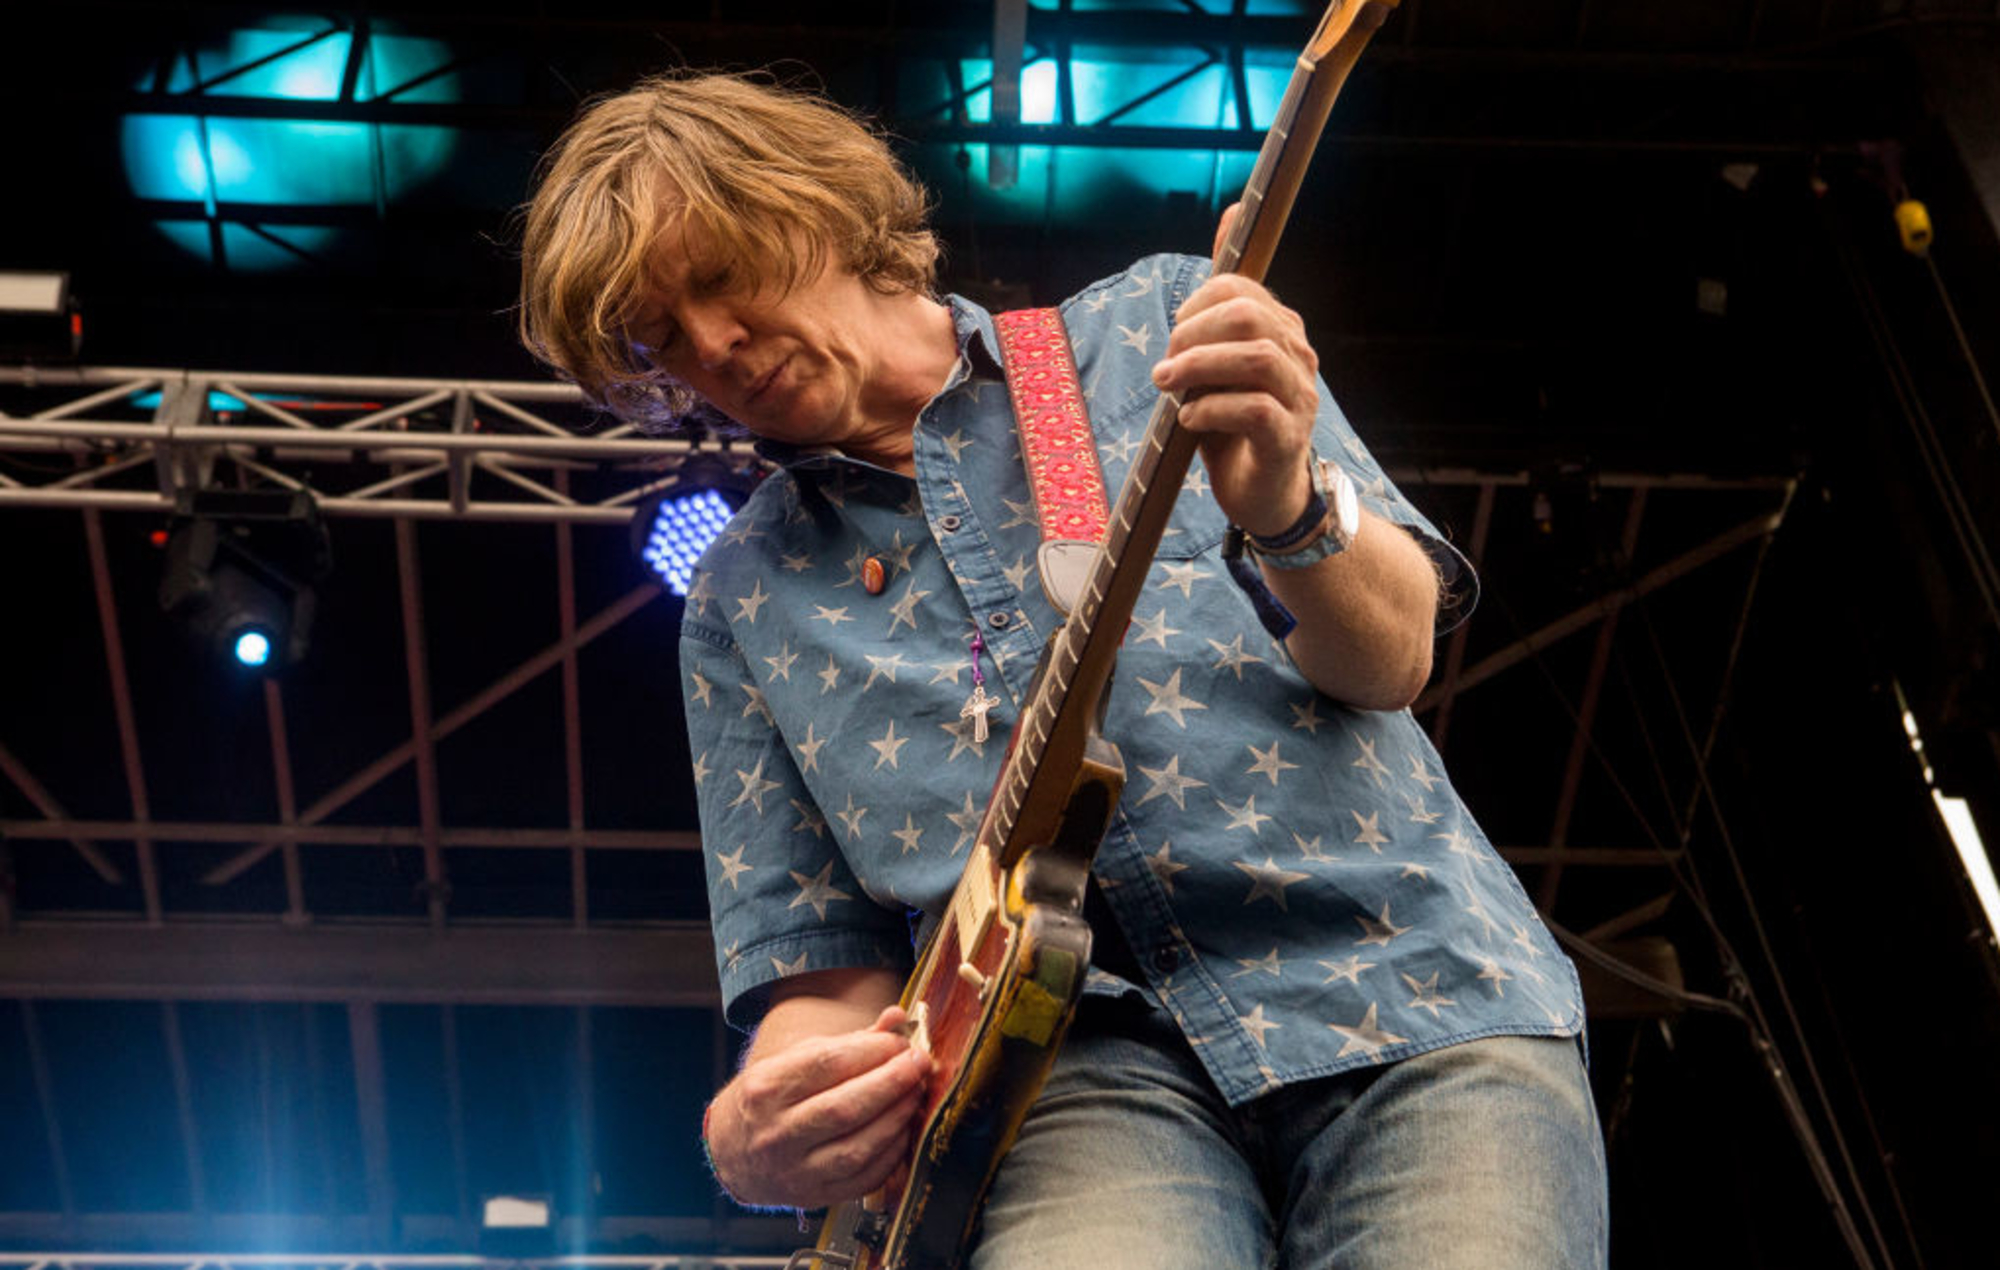 Thurston Moore Wallpapers